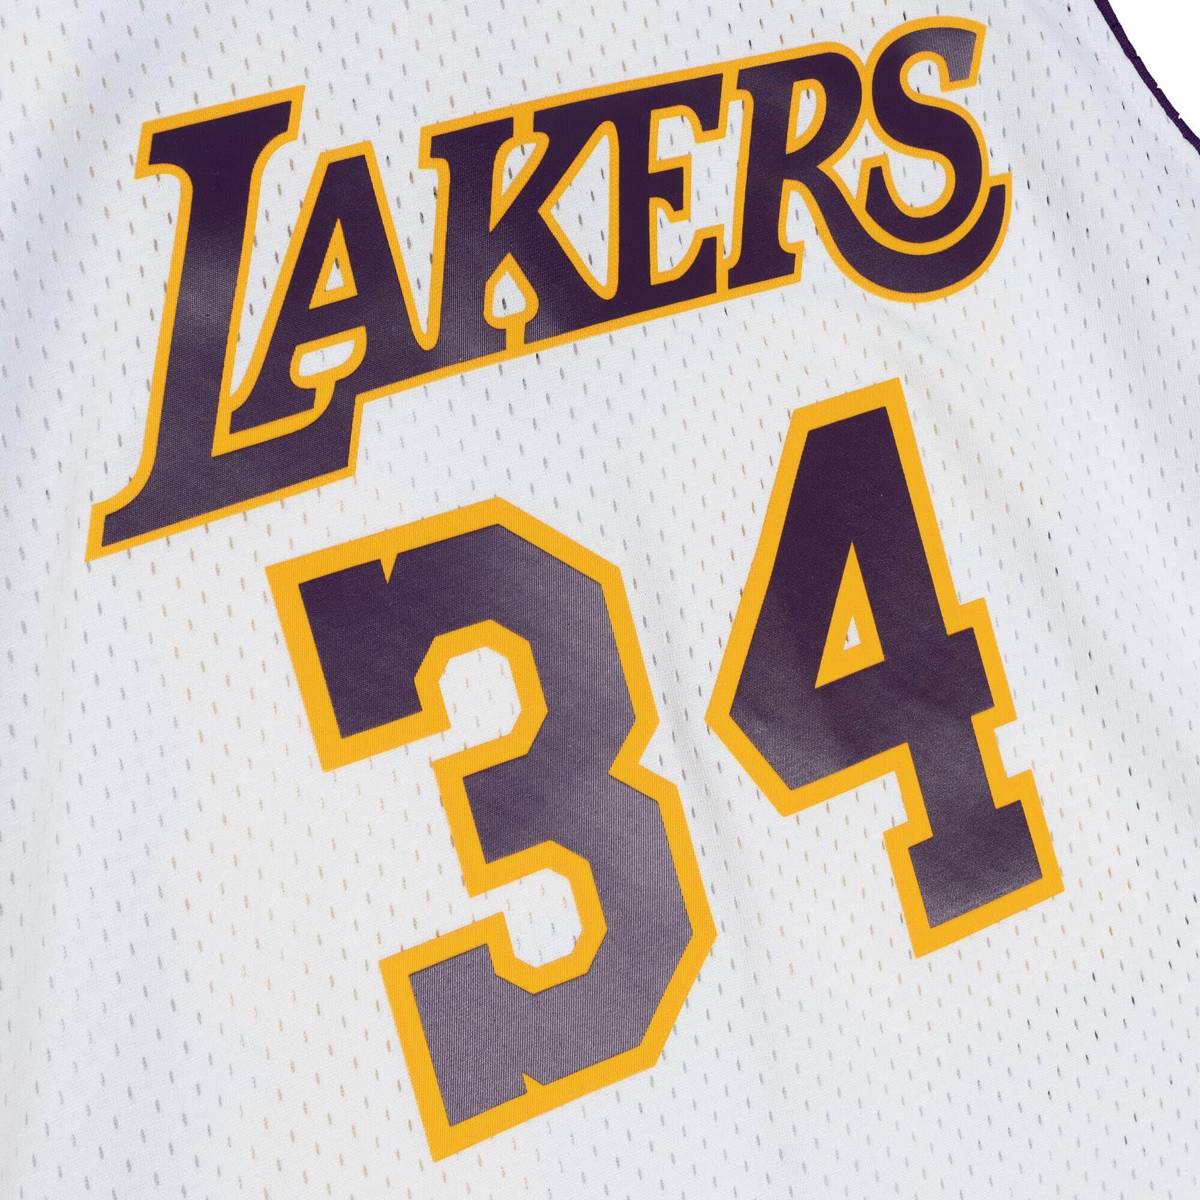 Mitchell & Ness Los Angeles Lakers #34 Shaquille O'Neal yellow